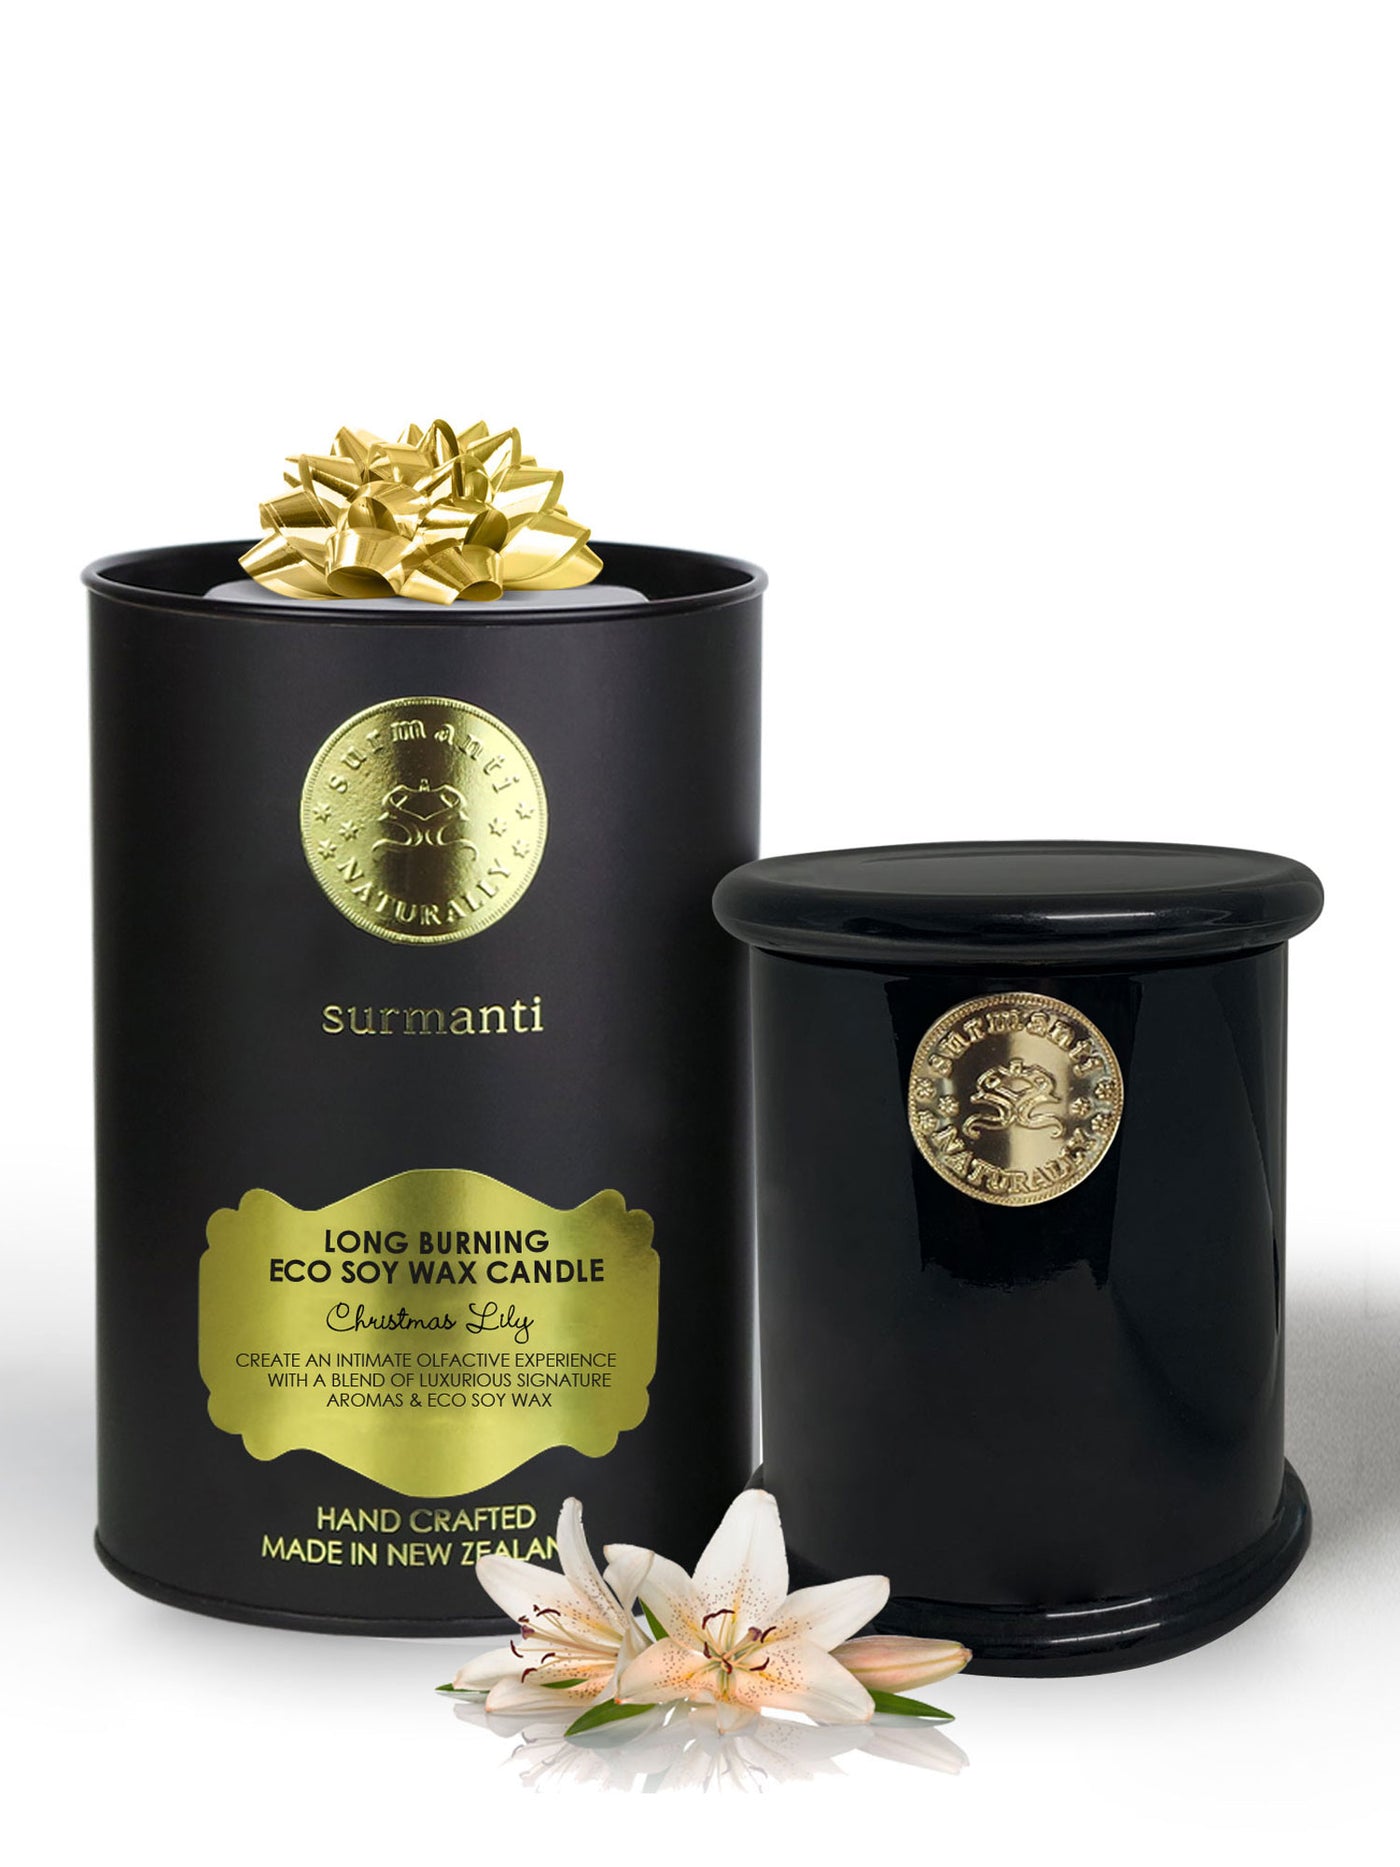 Christmas Lily Long Burning Eco Soy Wax Candle - Surmanti - Made In New Zealand